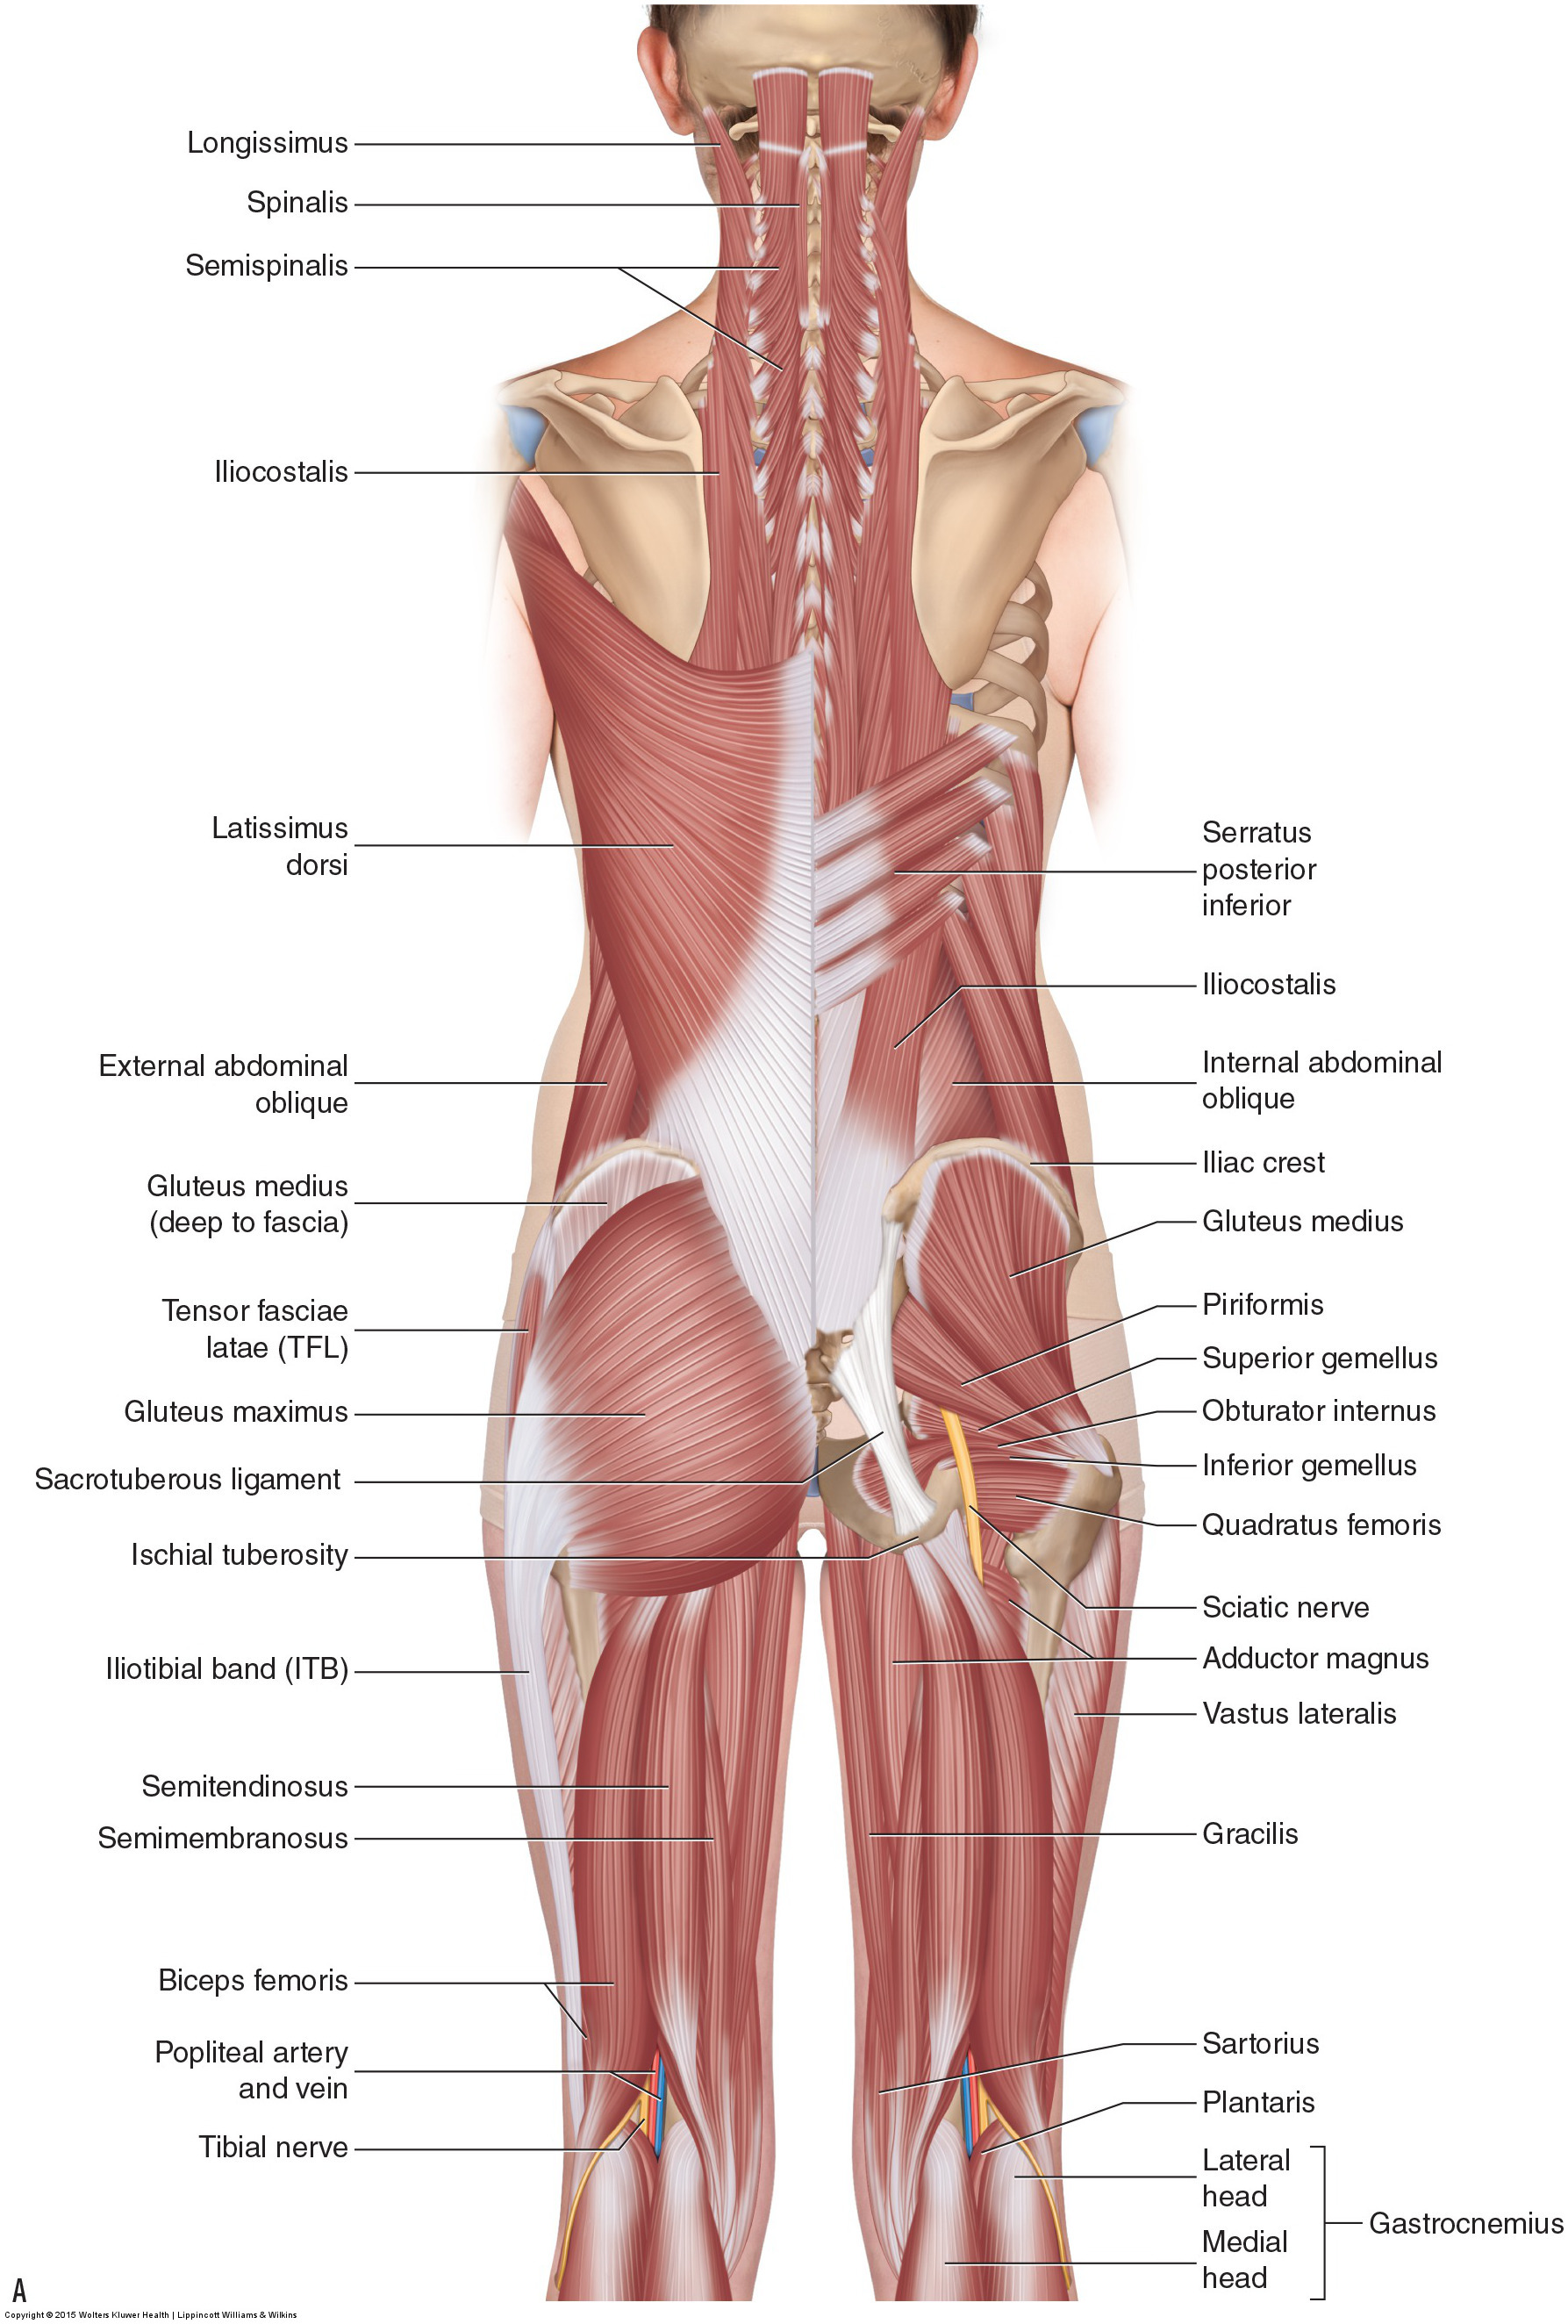 The hamstrings are composed of the semitendinosus, semimembranosus, and the biceps femoris muscles. Permission: Joseph E. Muscolino. Manual Therapy for the Low Back and Pelvis (2015).